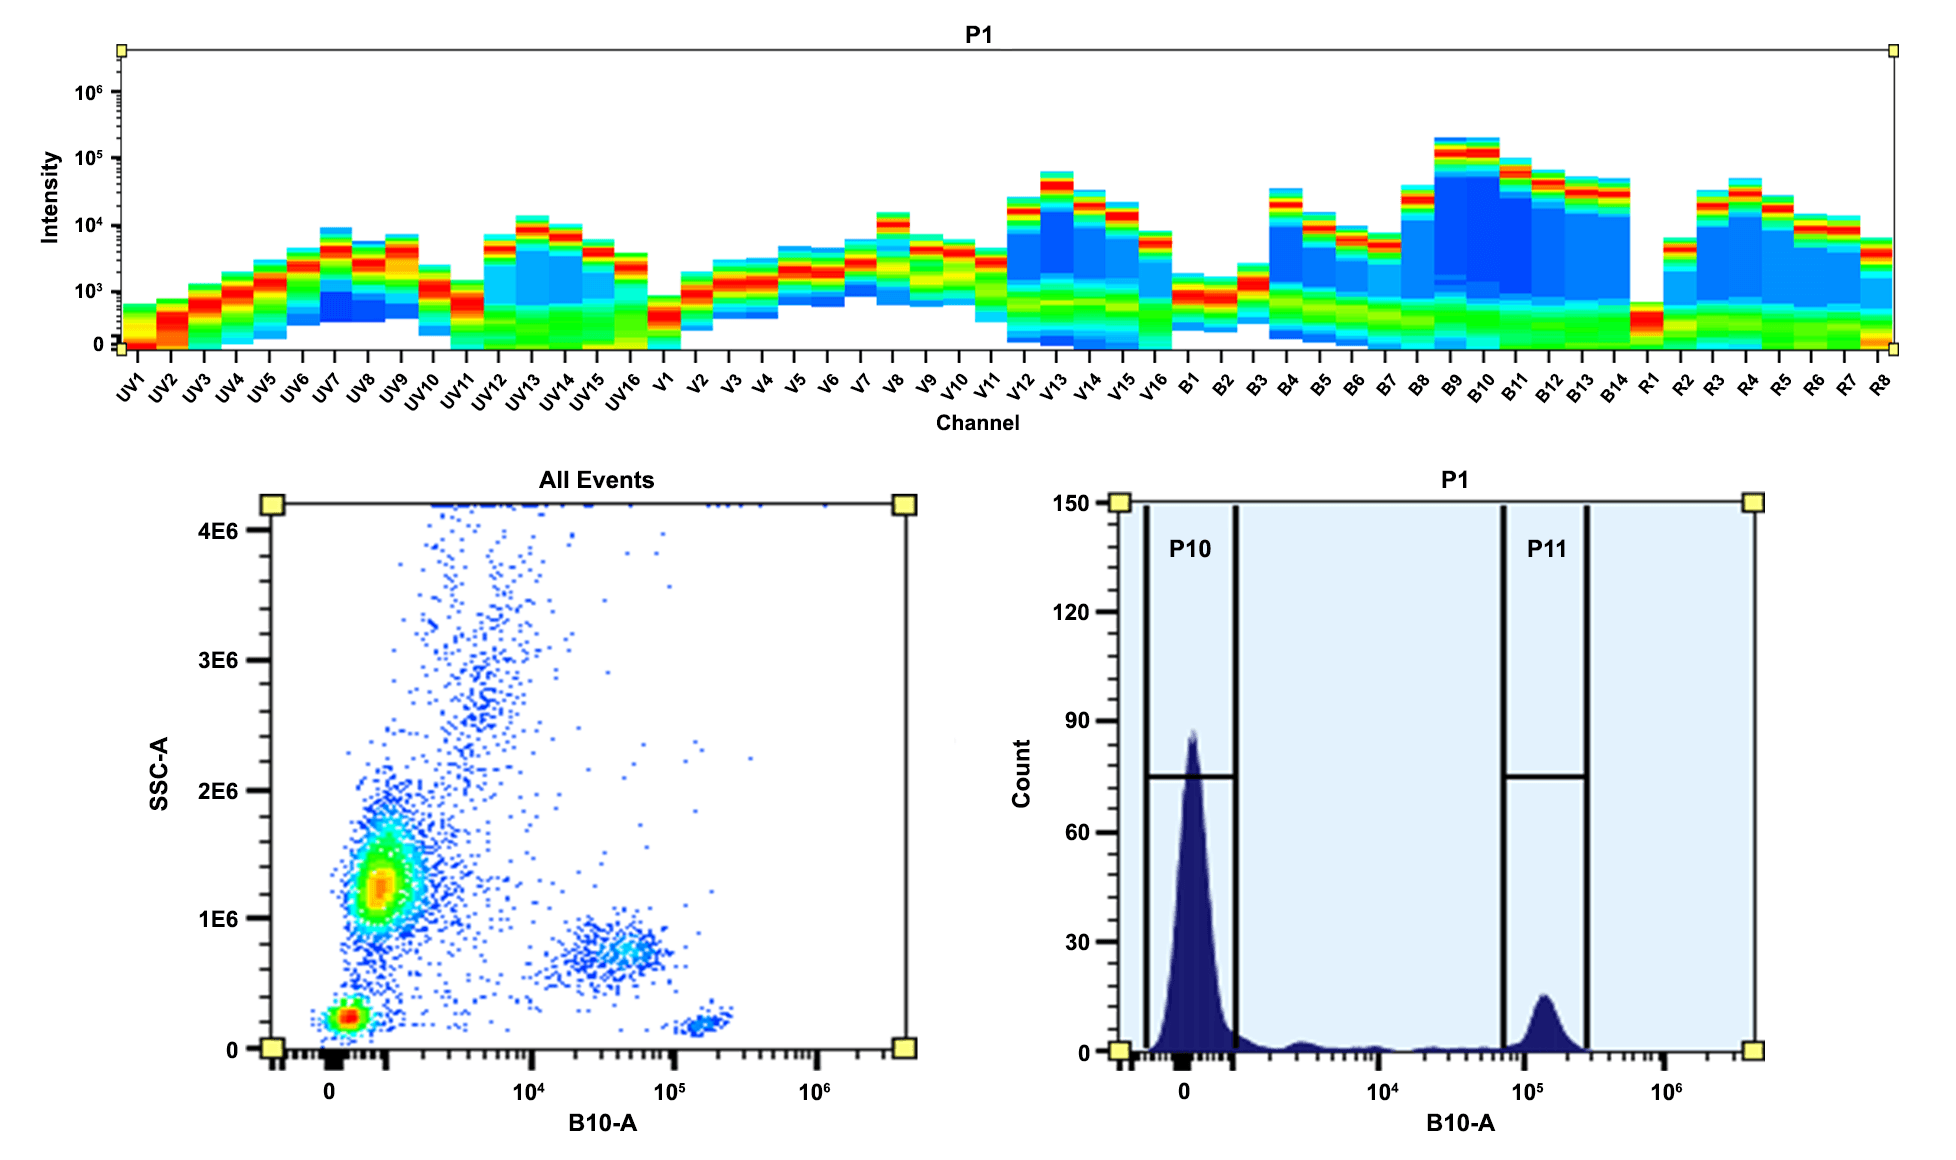 Top) Spectral pattern was generated using a 4-laser spectral cytometer. Spatially offset lasers (355 nm, 405 nm, 488 nm, and 640 nm) were used to create four distinct emission profiles, then, when combined, yielded the overall spectral signature. Bottom) Flow cytometry analysis of whole blood cells stained with PE/iFluor® 700 anti-human CD4 *SK3* conjugate. The fluorescence signal was monitored using an Aurora spectral flow cytometer in the PE/iFluor® 700 specific B10-A channel.